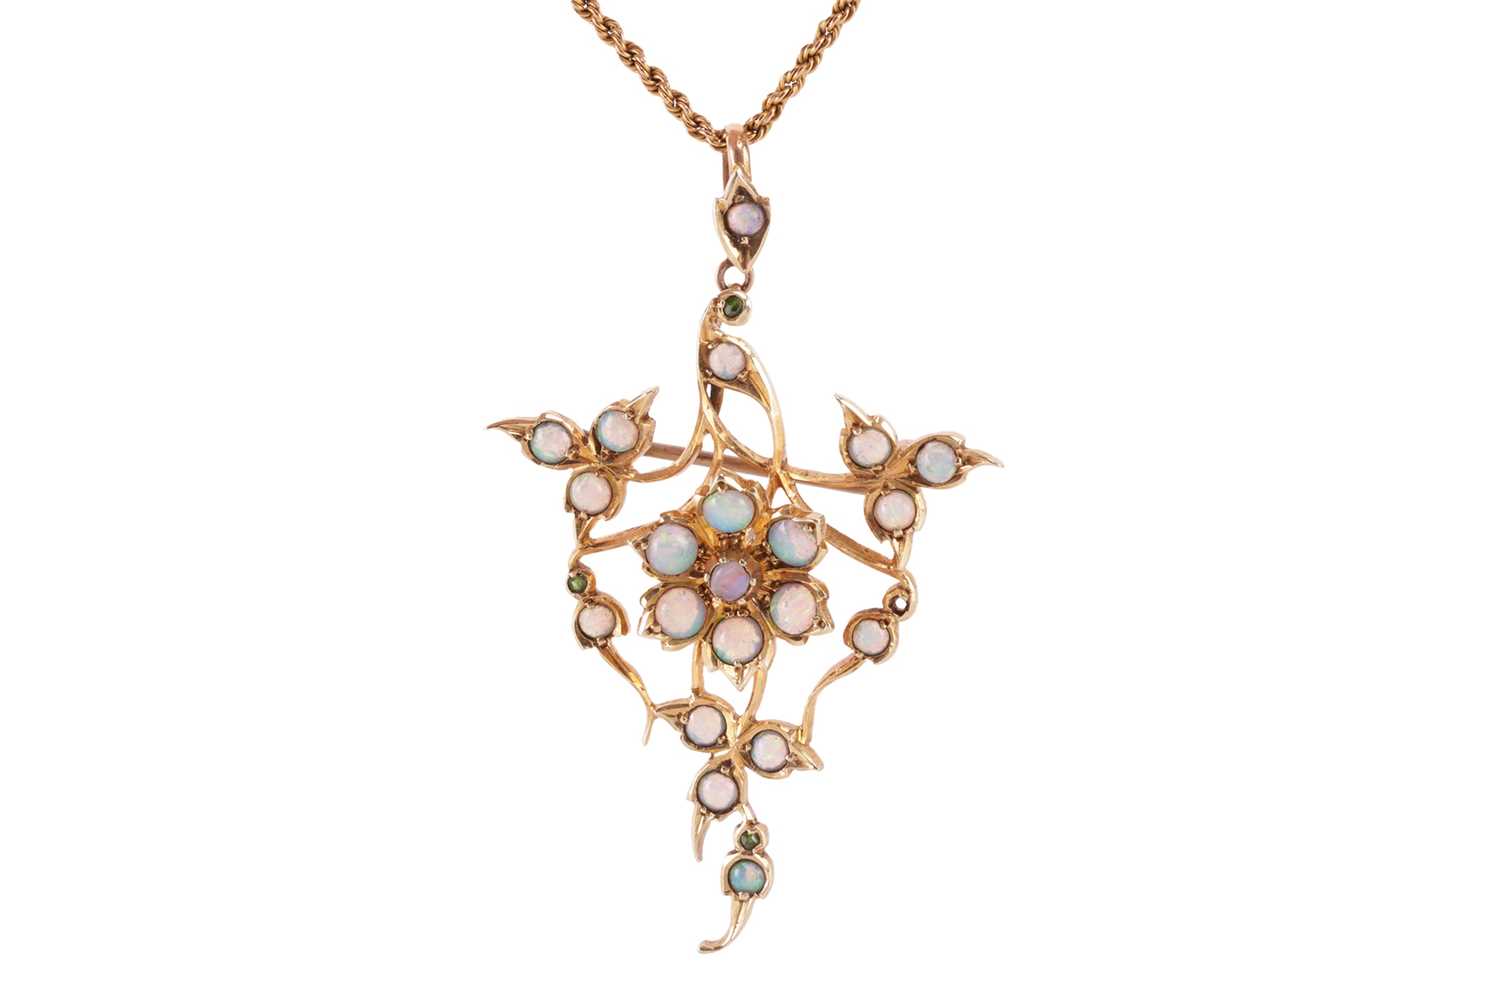 An opal-set floral brooch cum pendant on chain, the openwork mount centred with a flowerhead cluster